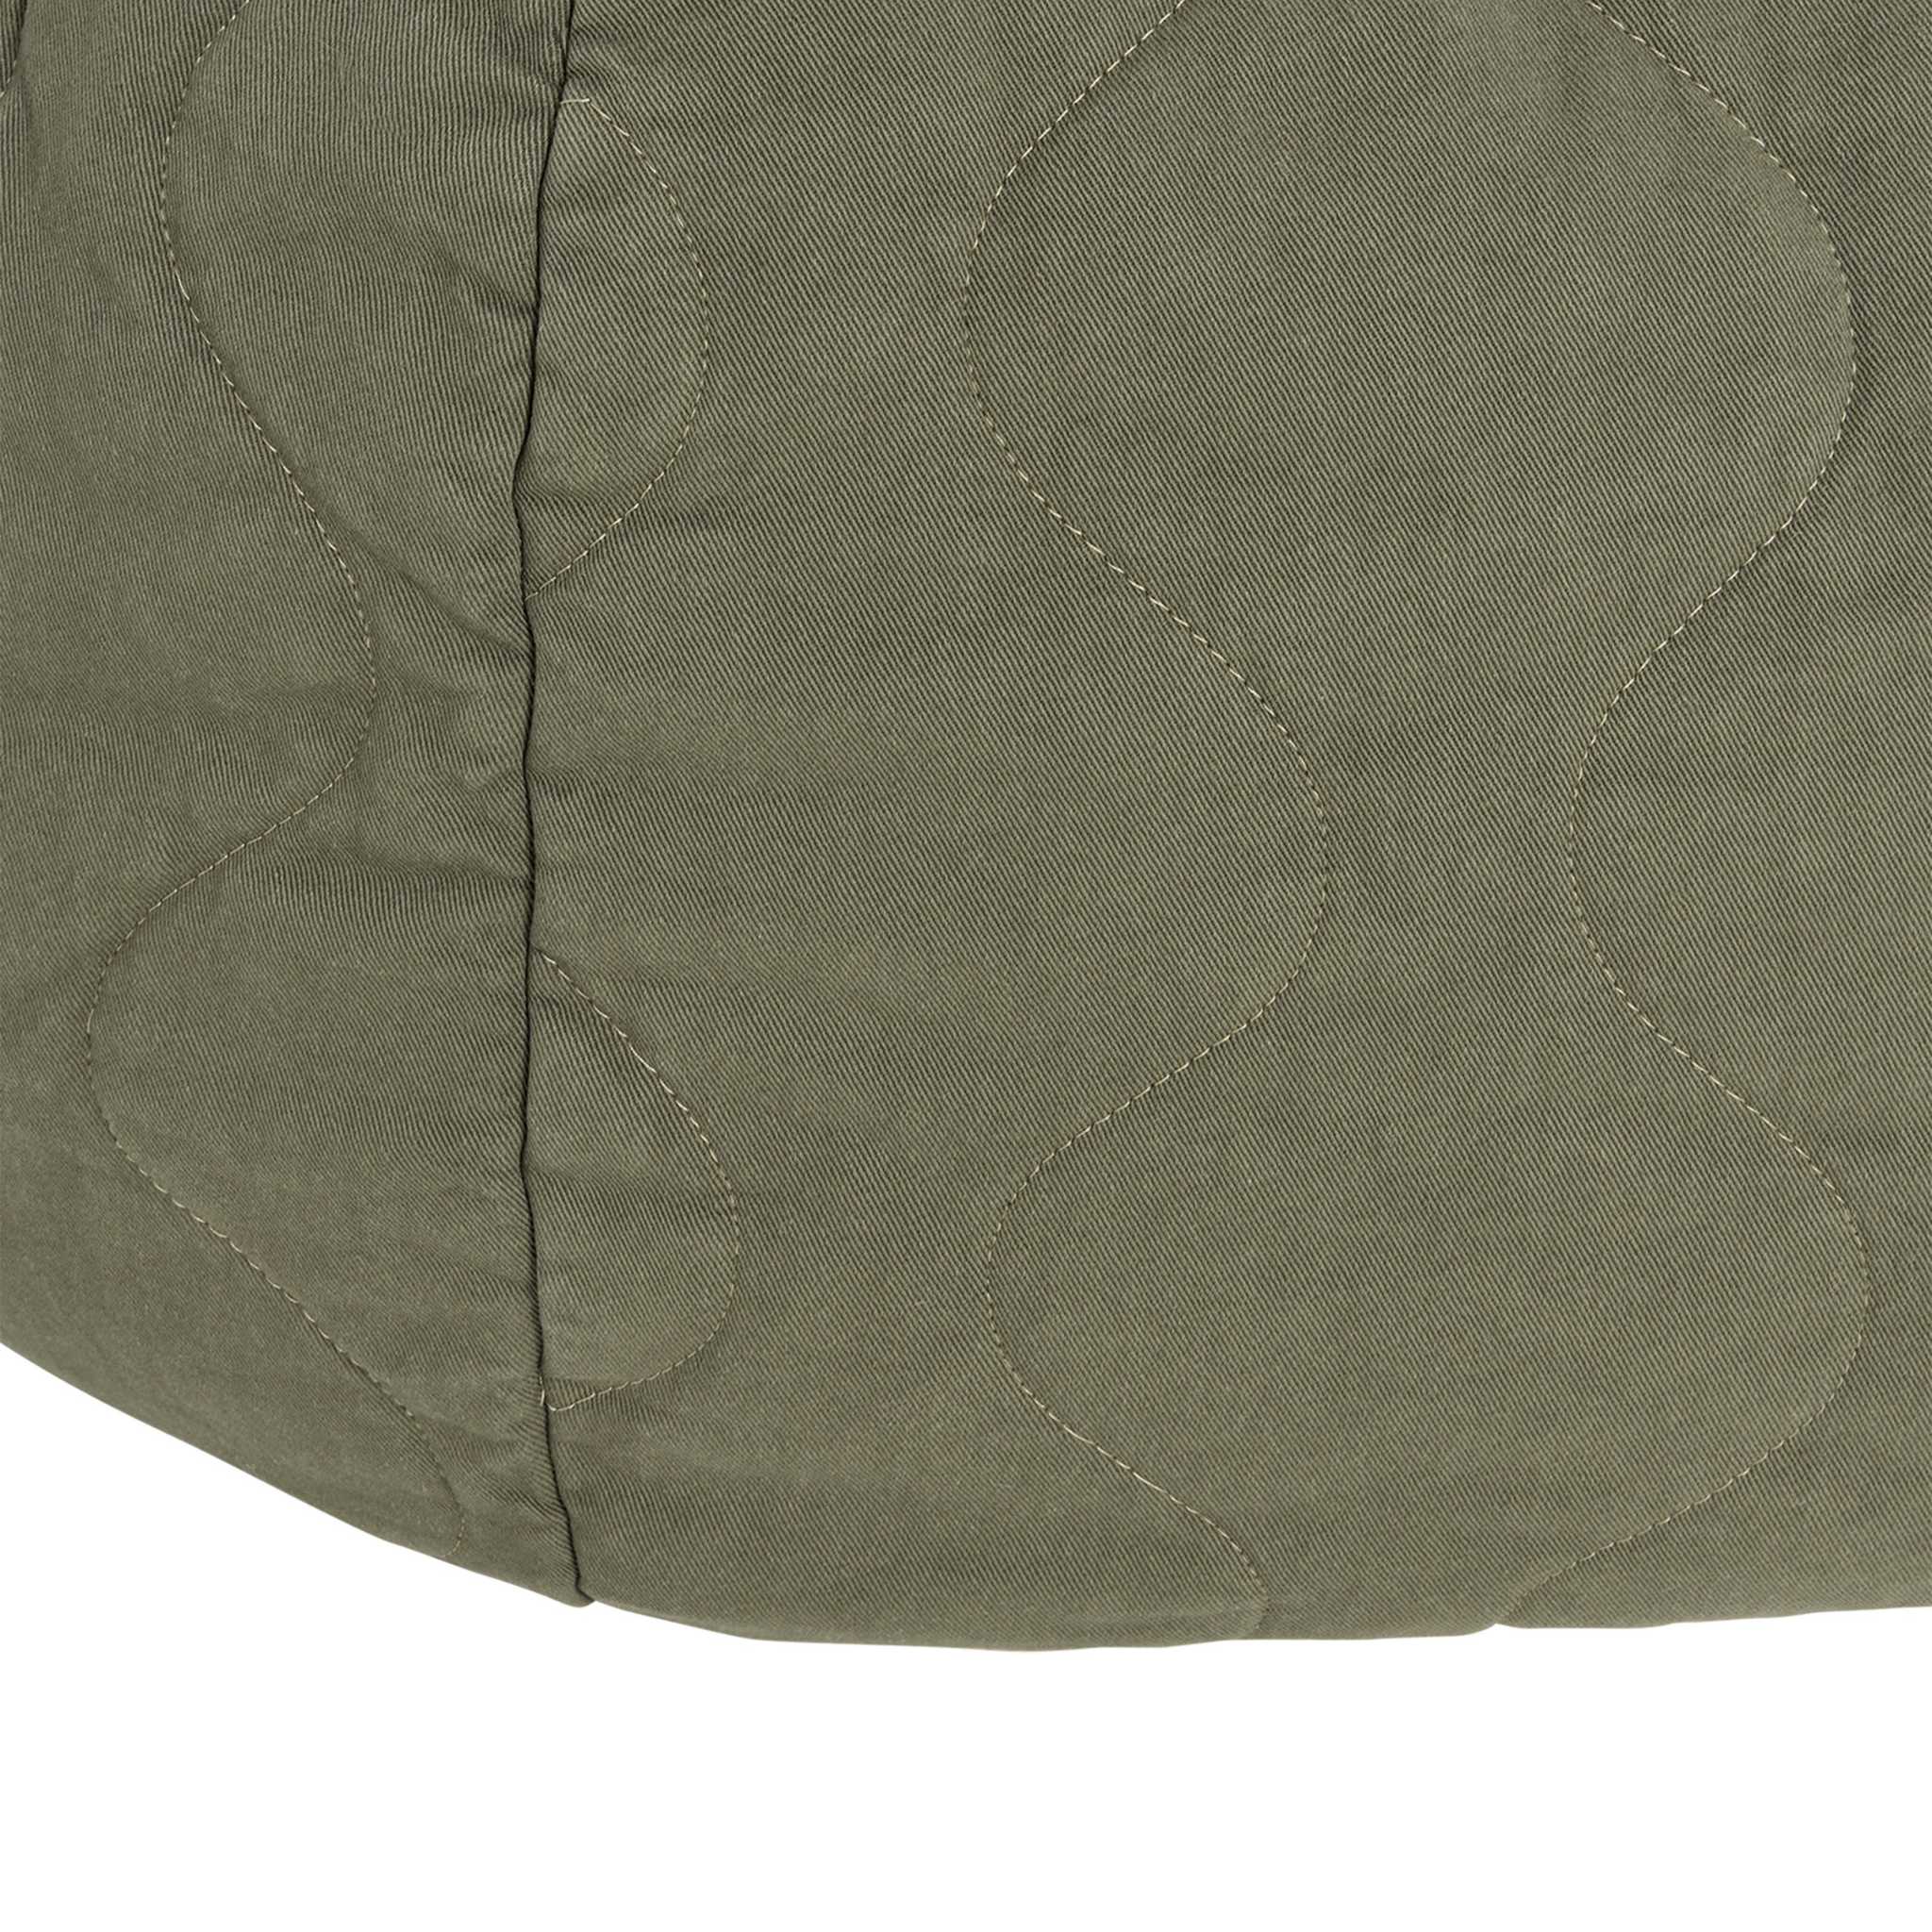 Nobodinoz Round Quilted Beanbag - Vetiver Details 